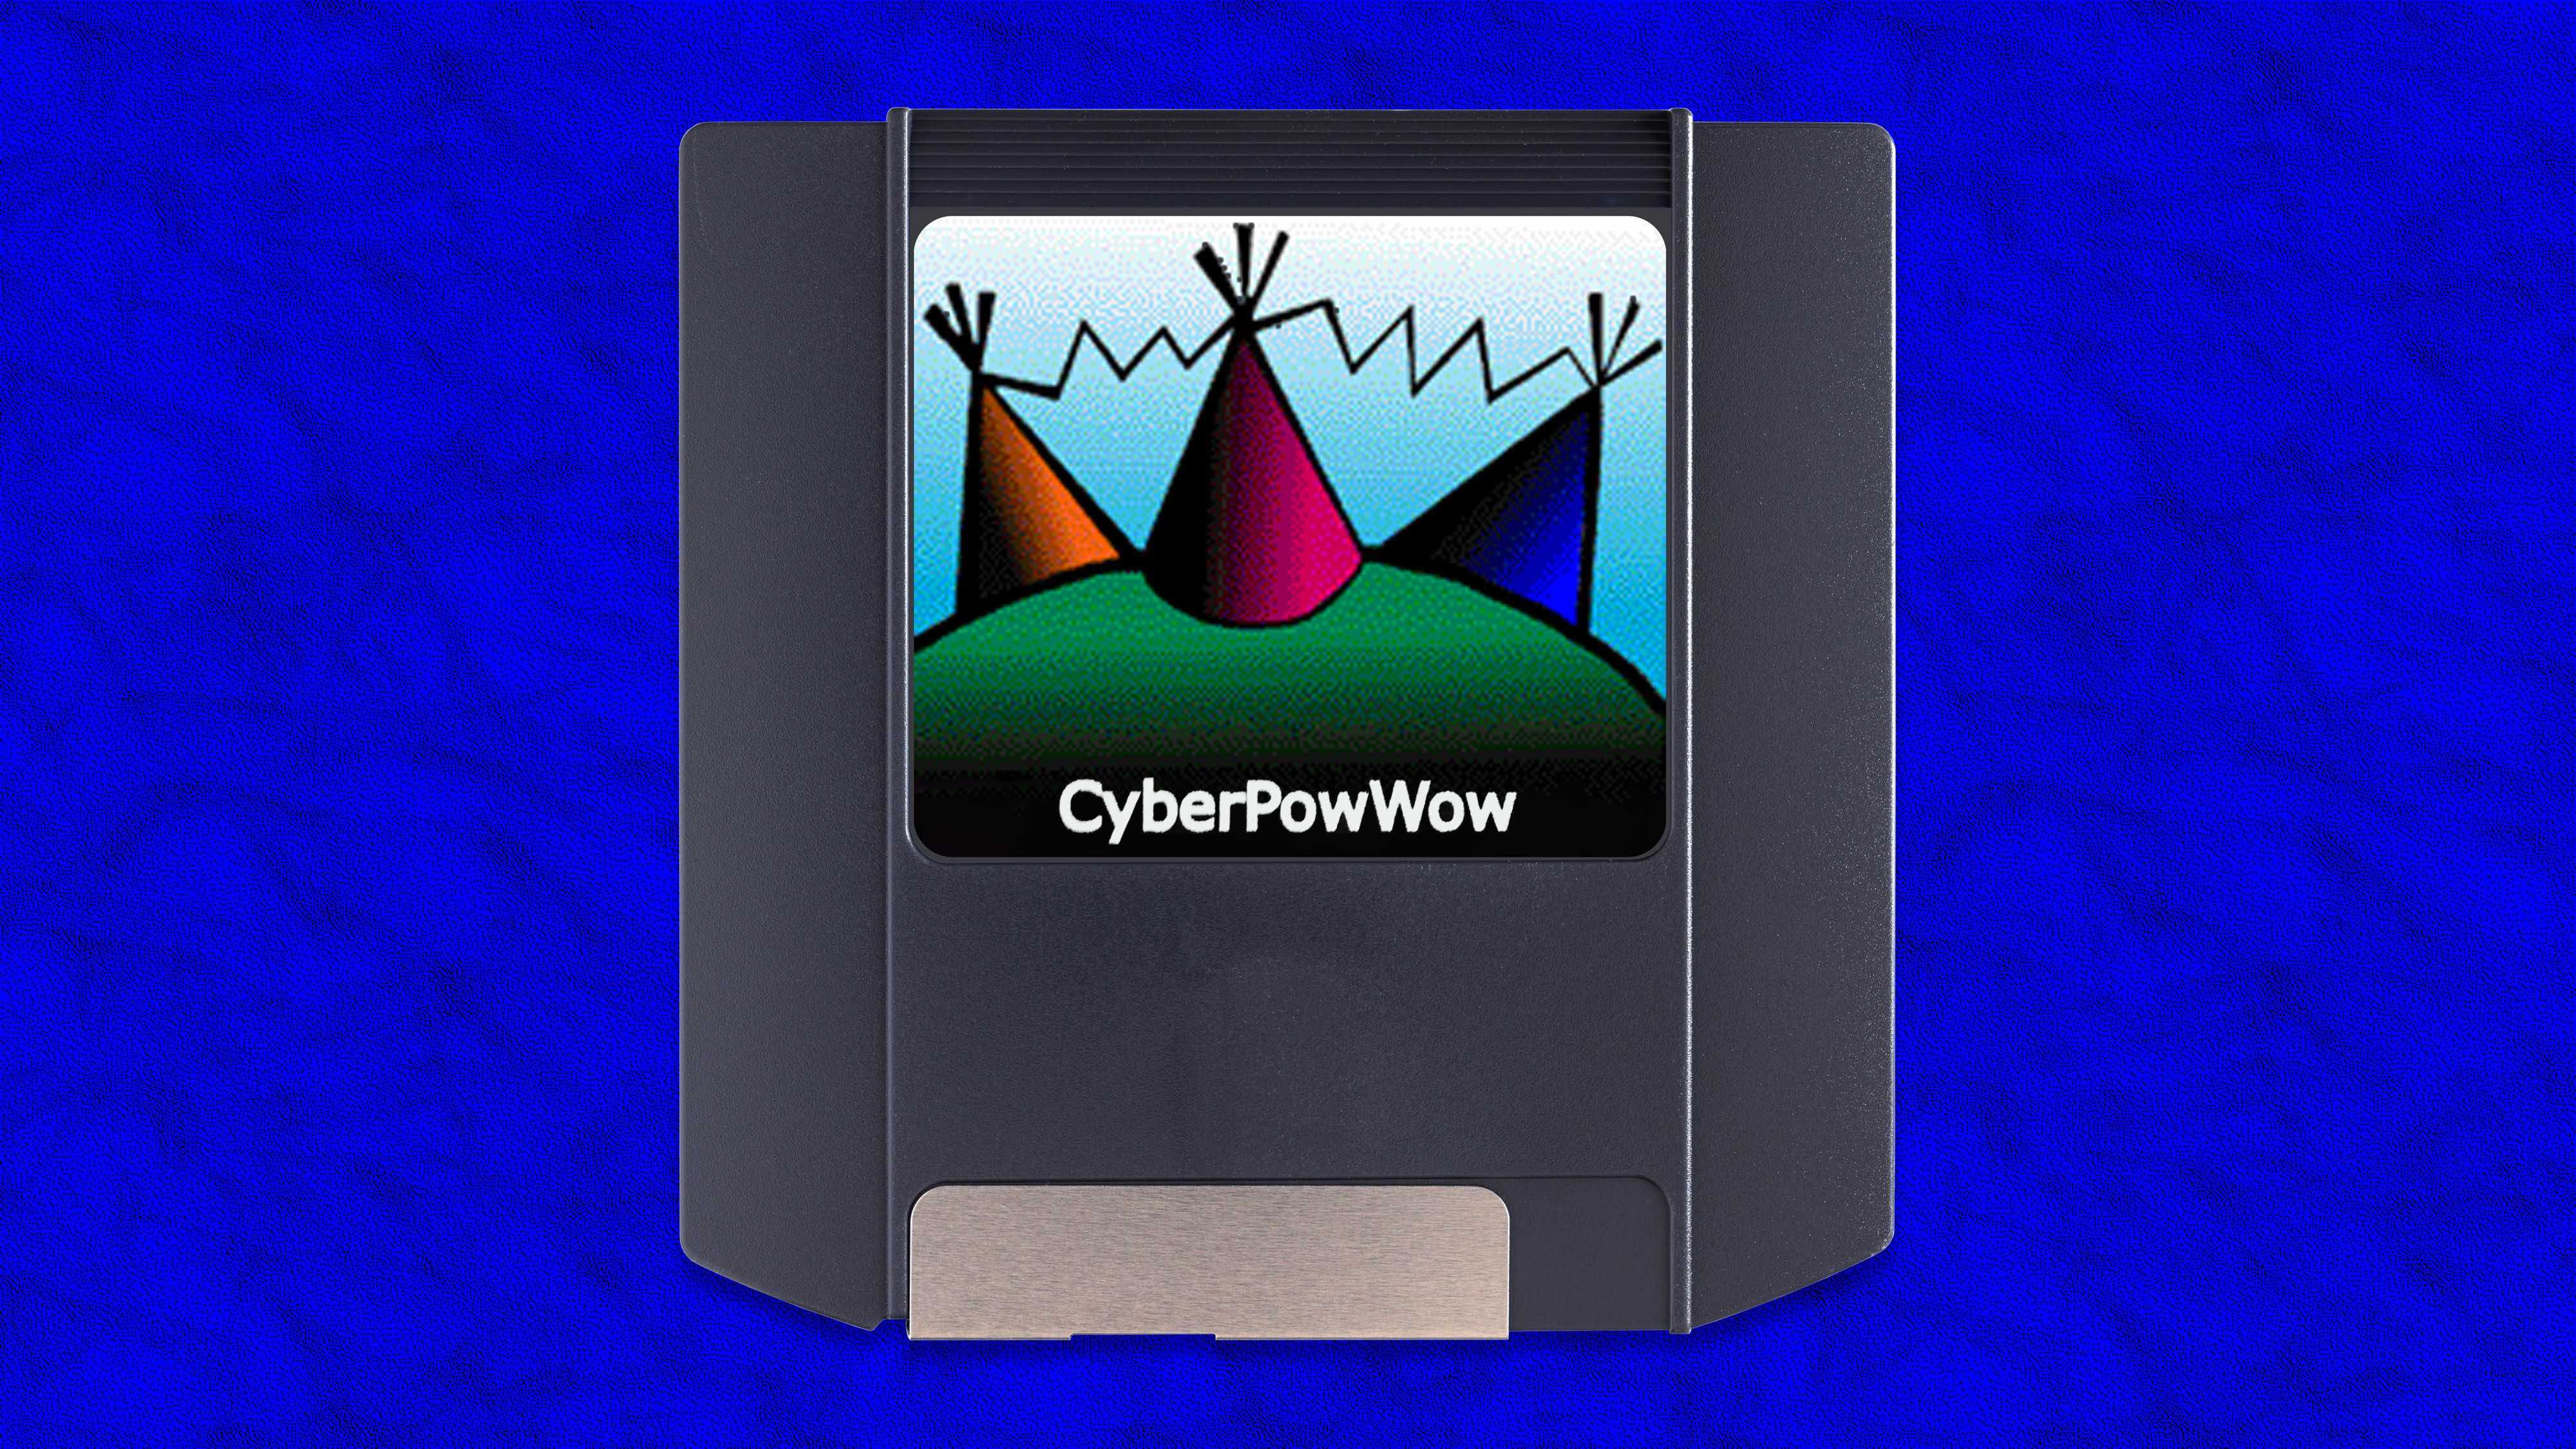 3D floppy disk on a cerulean blue background. The floppy disk has an image of three tipis in orange, pink, and blue on a green hill.